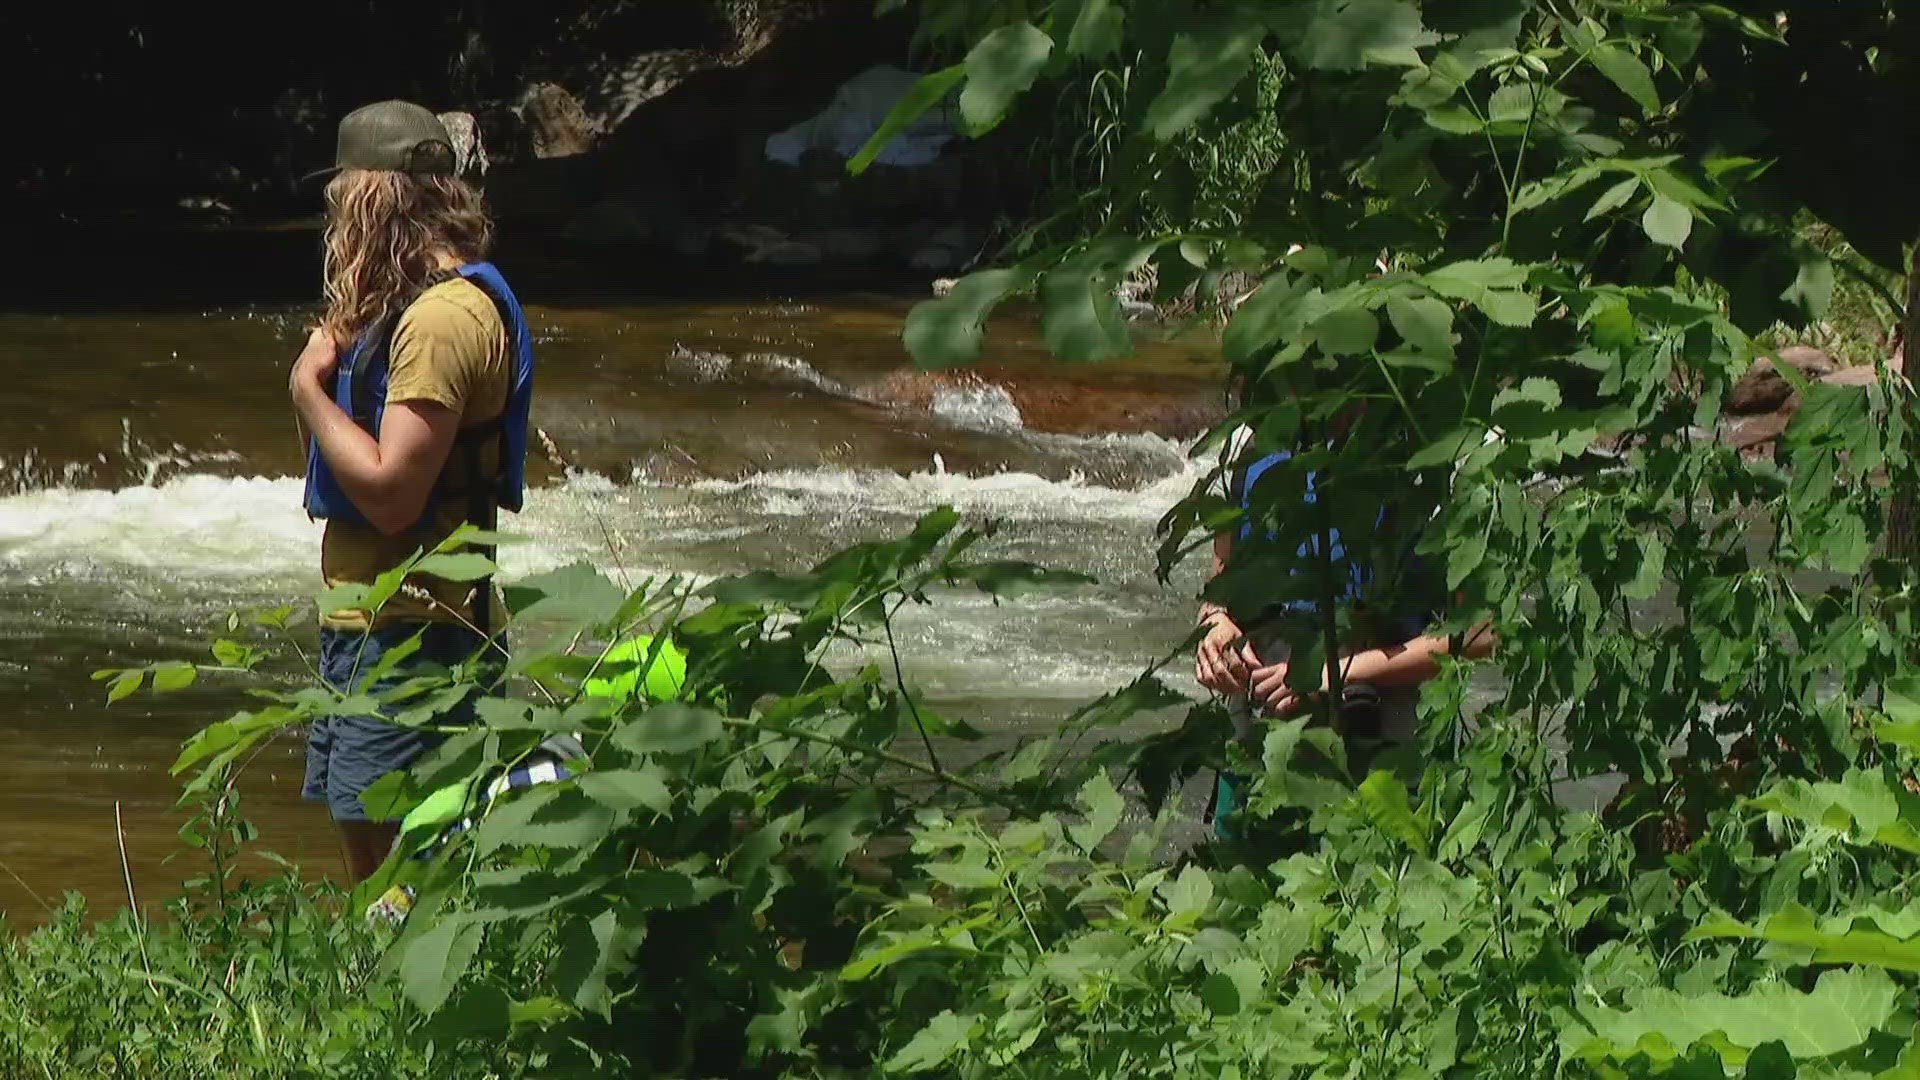 Despite a woman dying in Boulder Creek on Wednesday, organizers for the event say the flows are safe.